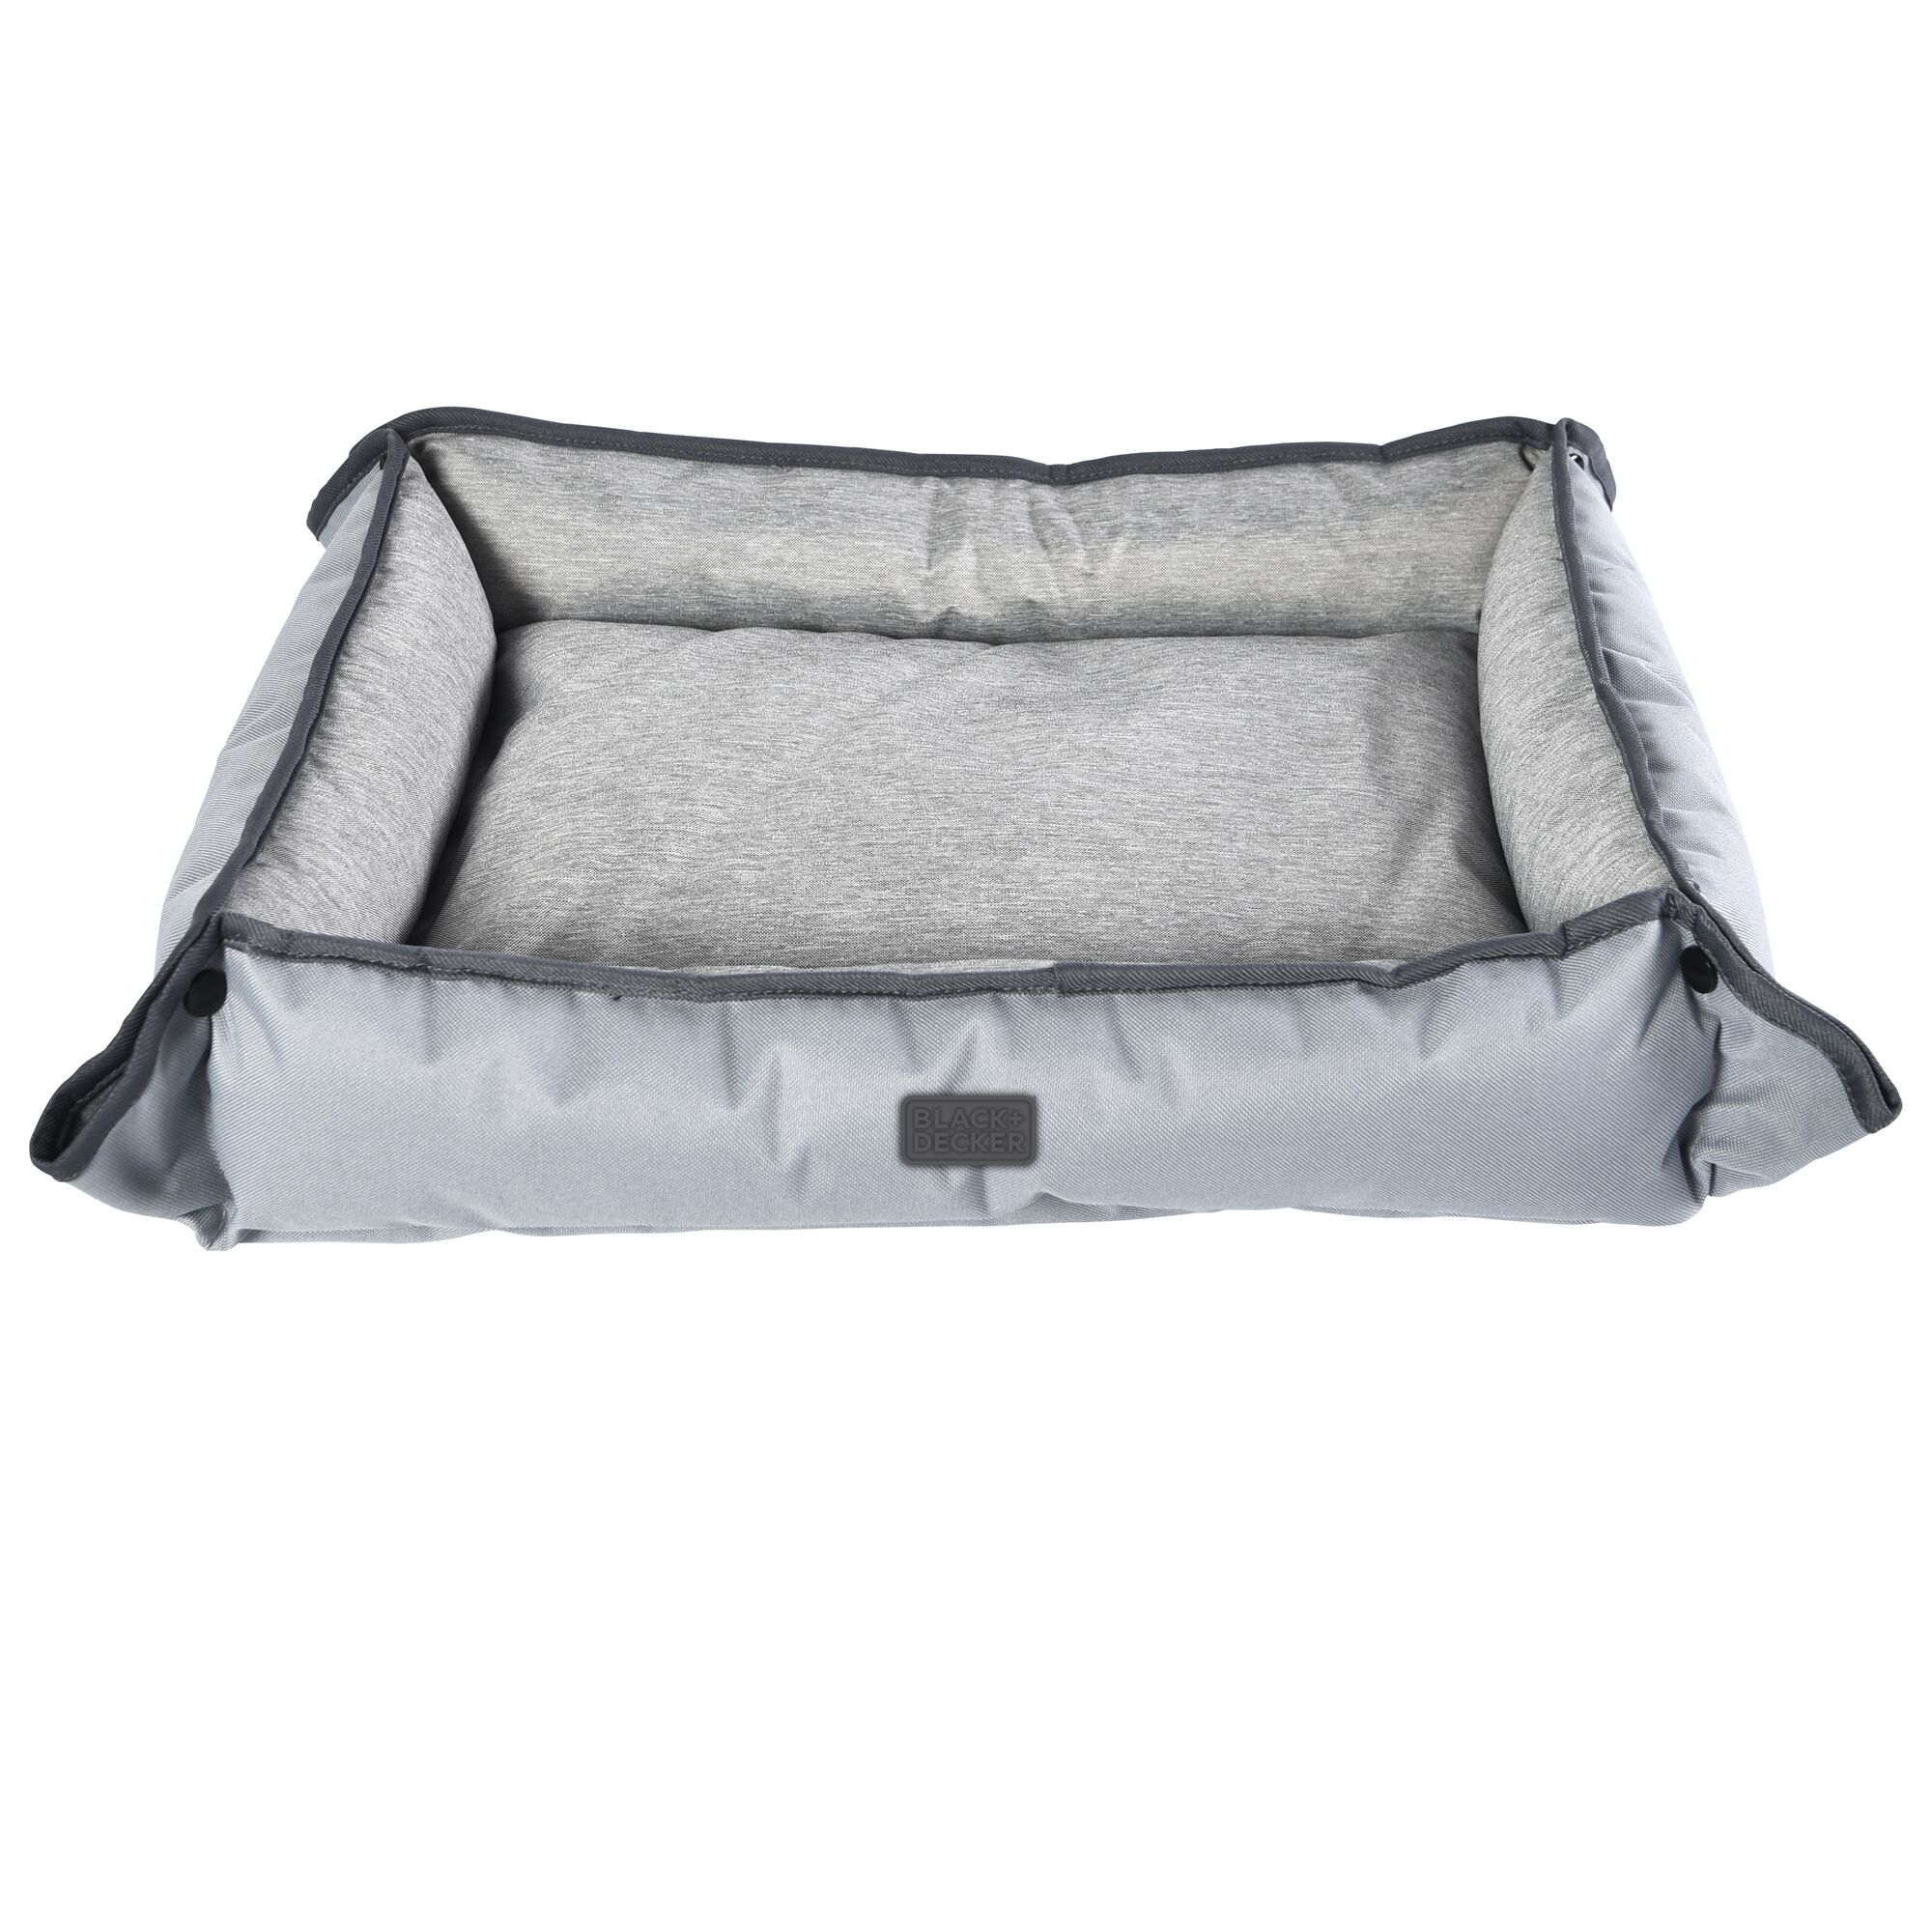 Hero image of the four way BLACK+DECKER pet bed in a lighter color